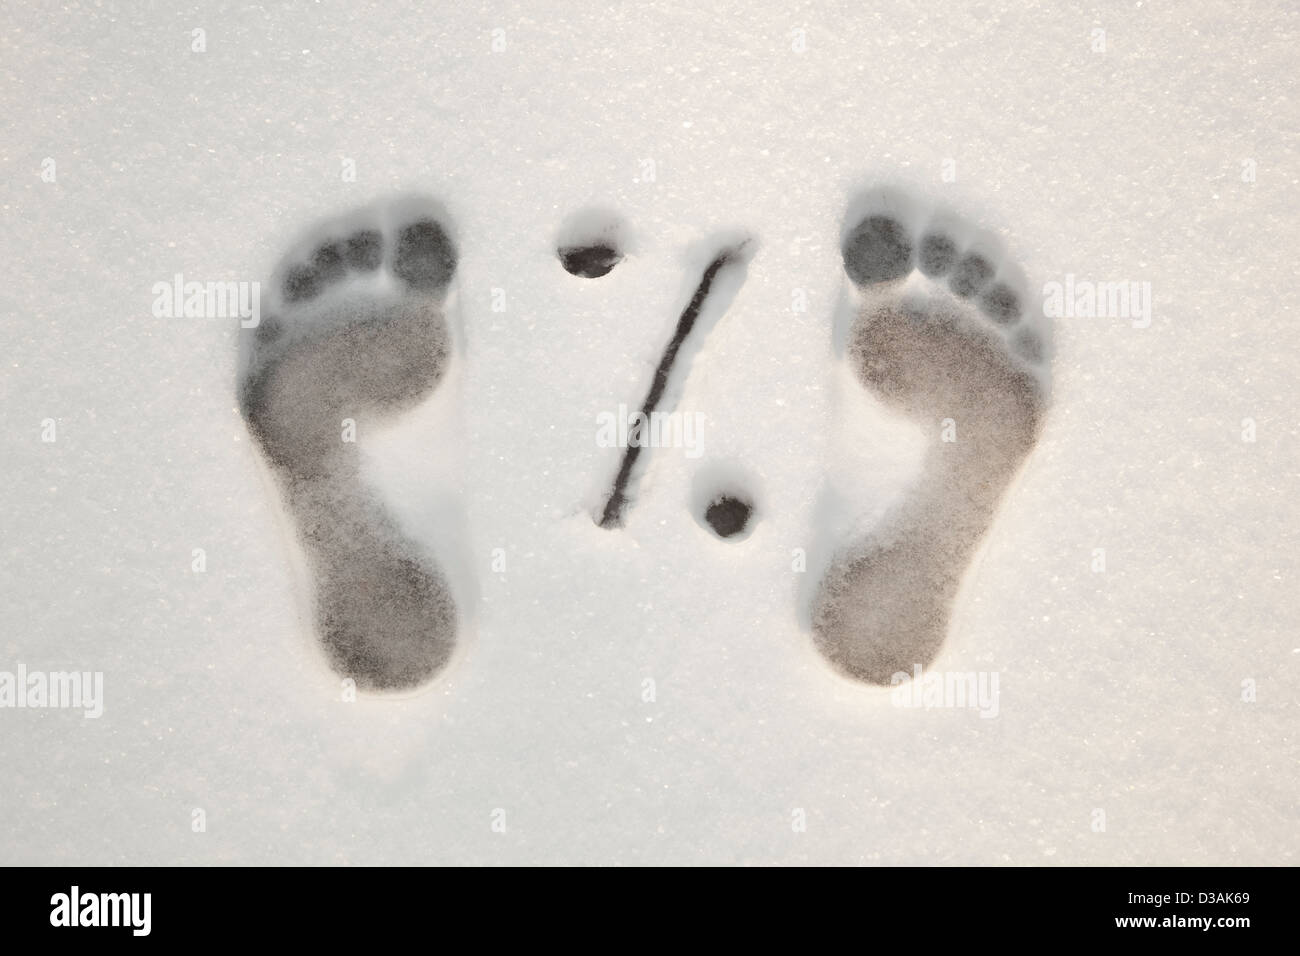 traces of barefooted foot on white snow Stock Photo